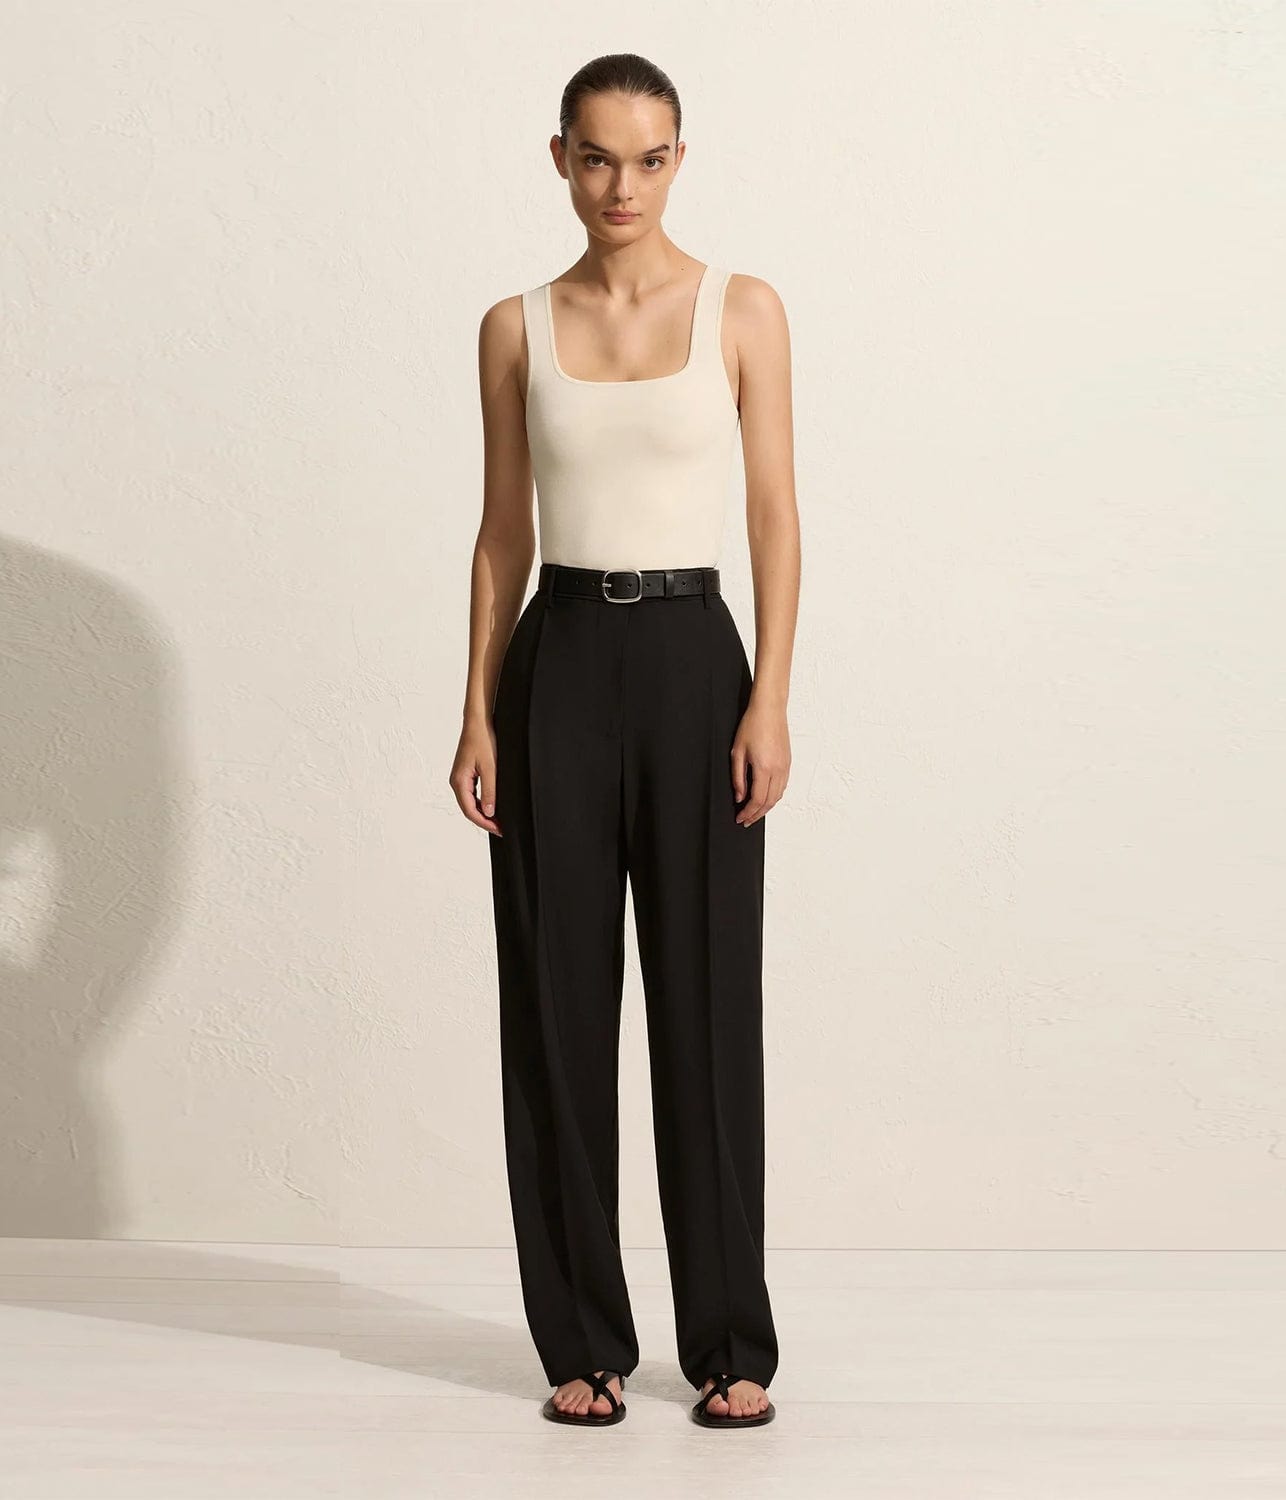 MATTEAU RELAXED TAILORED TROUSER BLACK